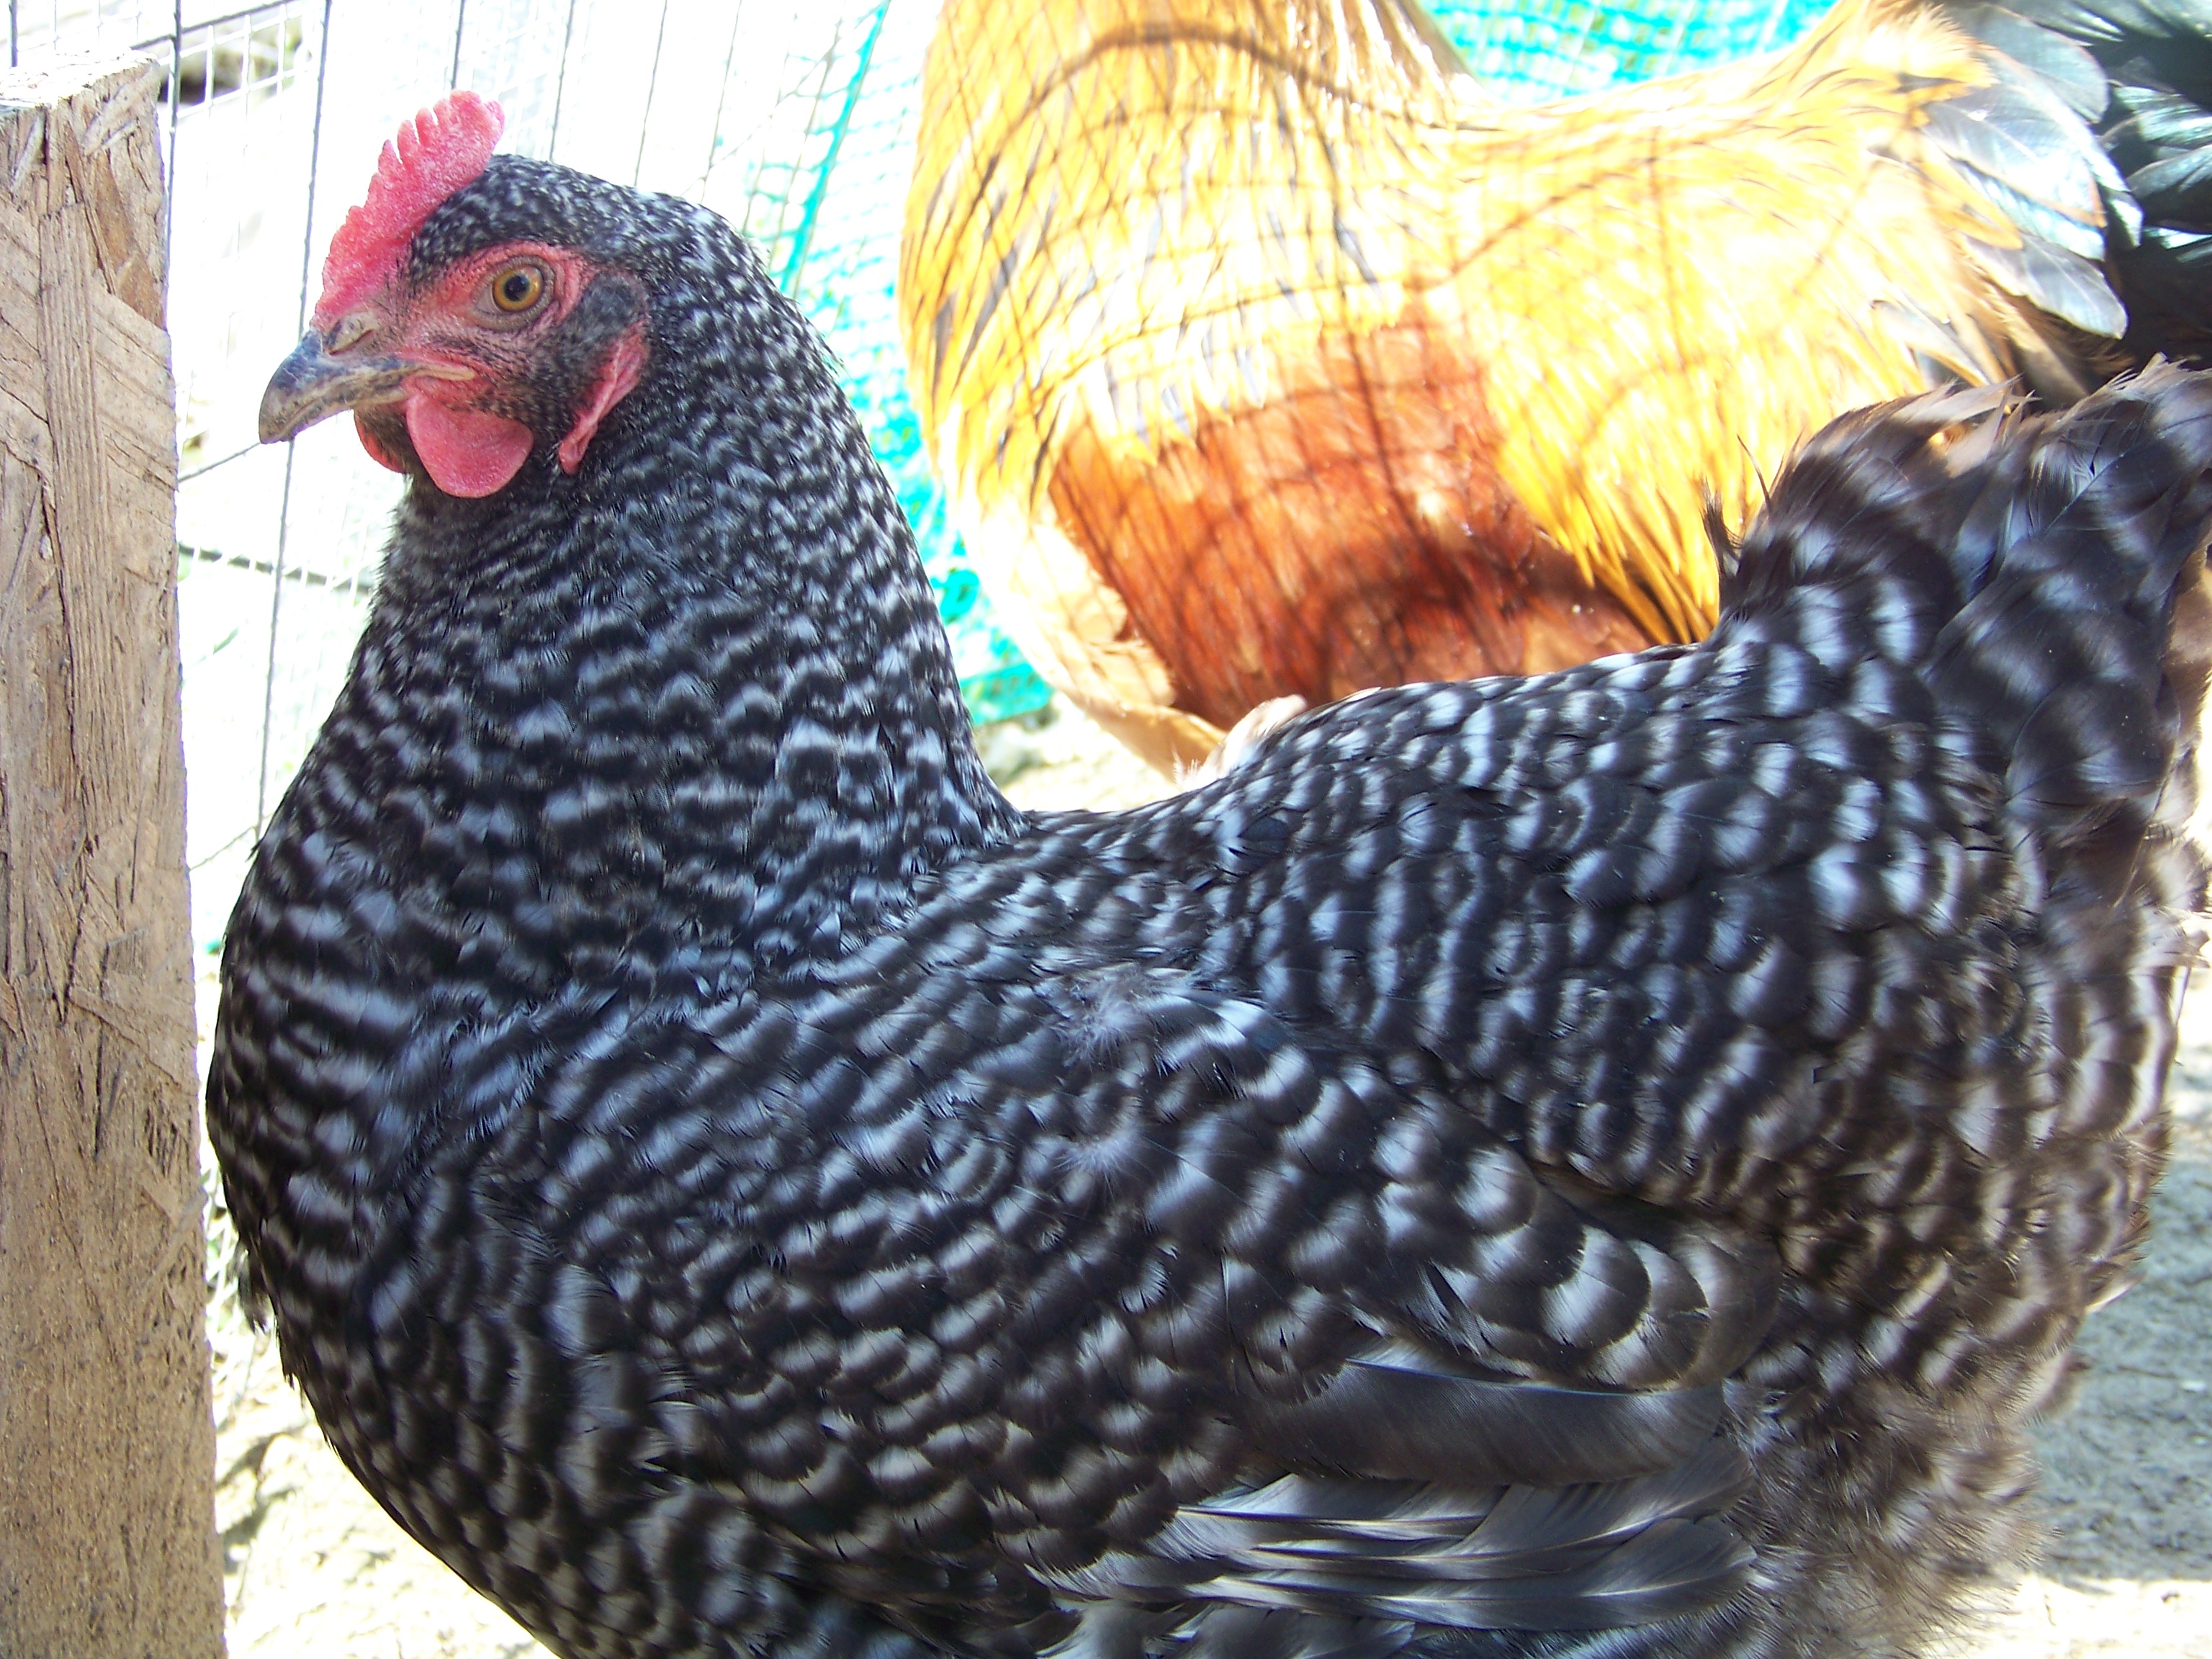 "Dixie" - LF Barred Rock hen. She's also very photogenic and vain. Her and Henny Penny (EE) are at the top of the pecking order. They were both "the chicks that started it all". Picked them up as chicks from the feed store (because "Hey, we already have ducks, might as well get some chickens, too" Harharhar...), and they stirred up an addiction in me.